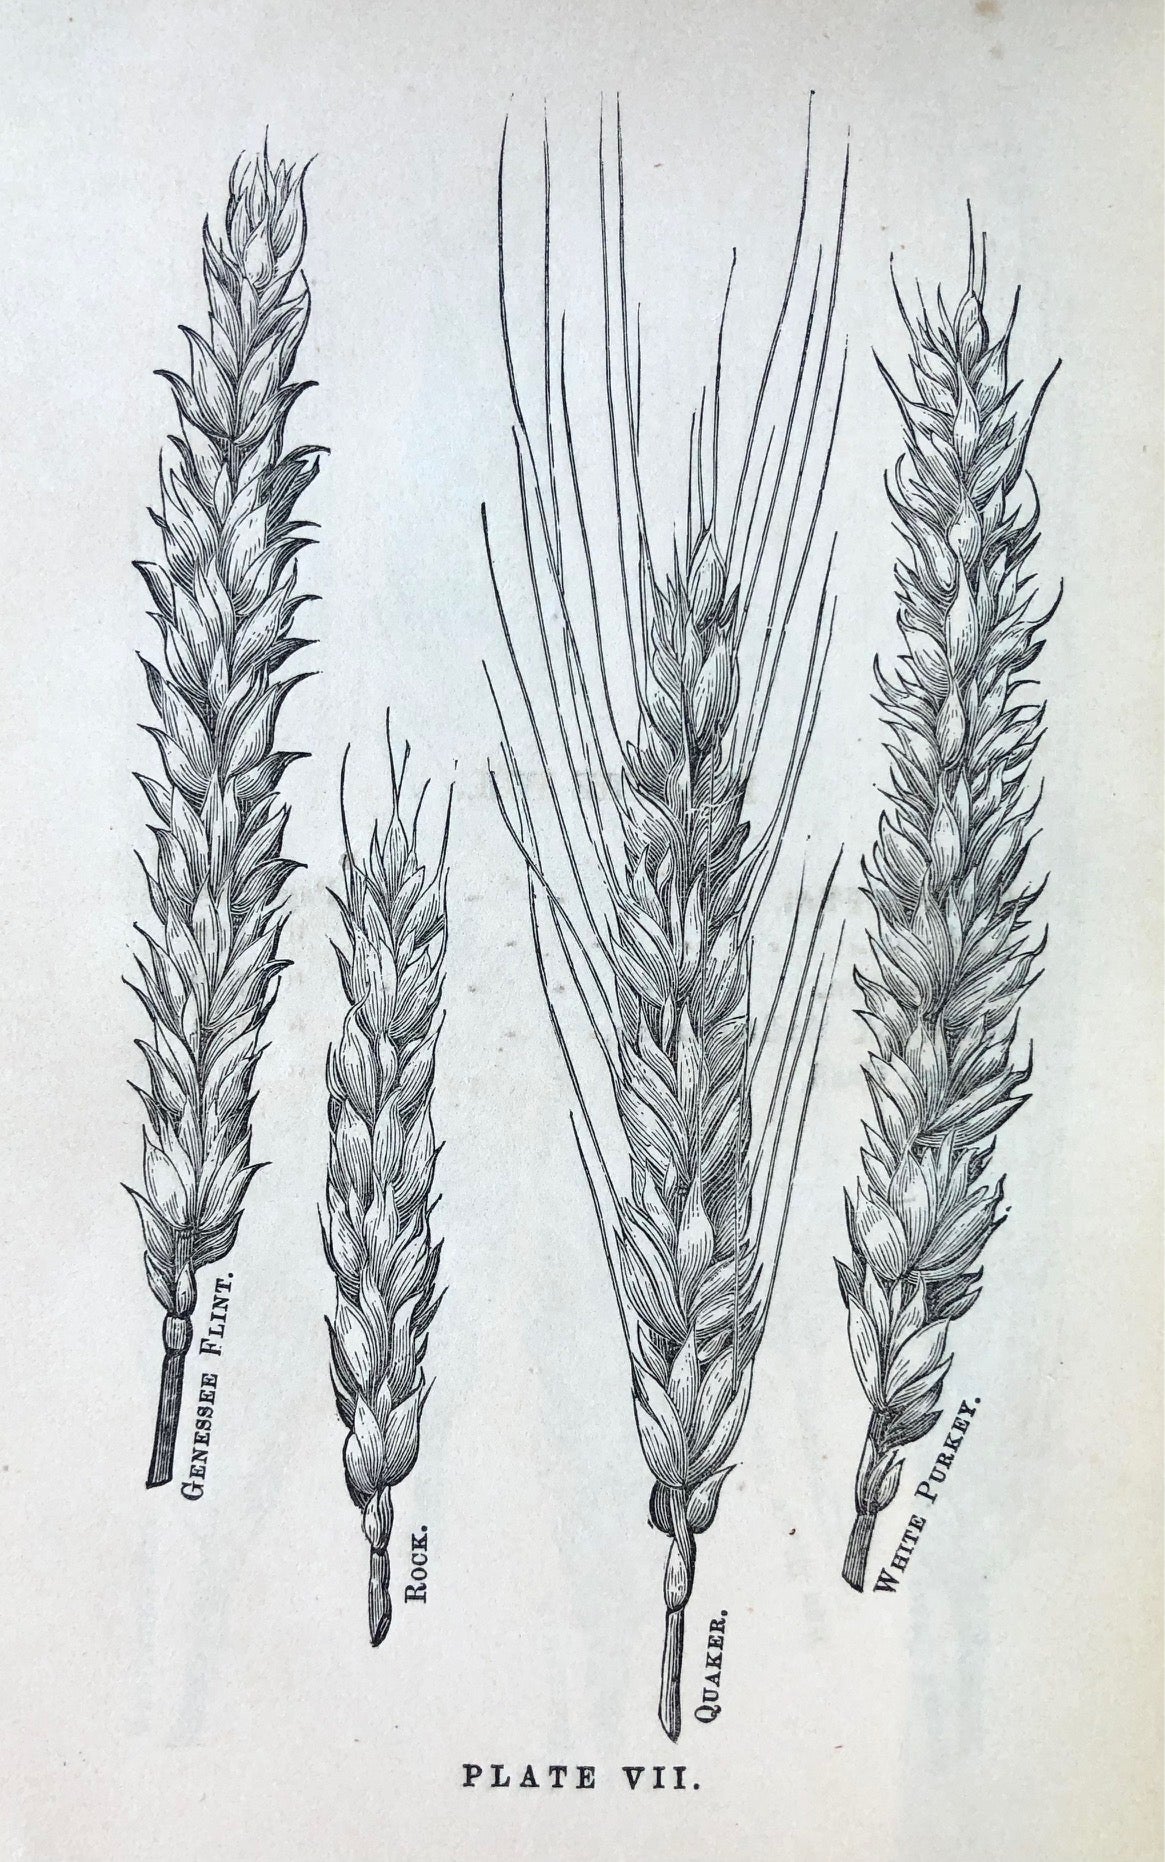 (Agriculture) John H. Klippart. The Wheat Plant: its Origin, Culture, Growth, Development, Composition, Varieties, Diseases, etc., etc., Together with a Few Remarks on Indian Corn, its Culture, etc.